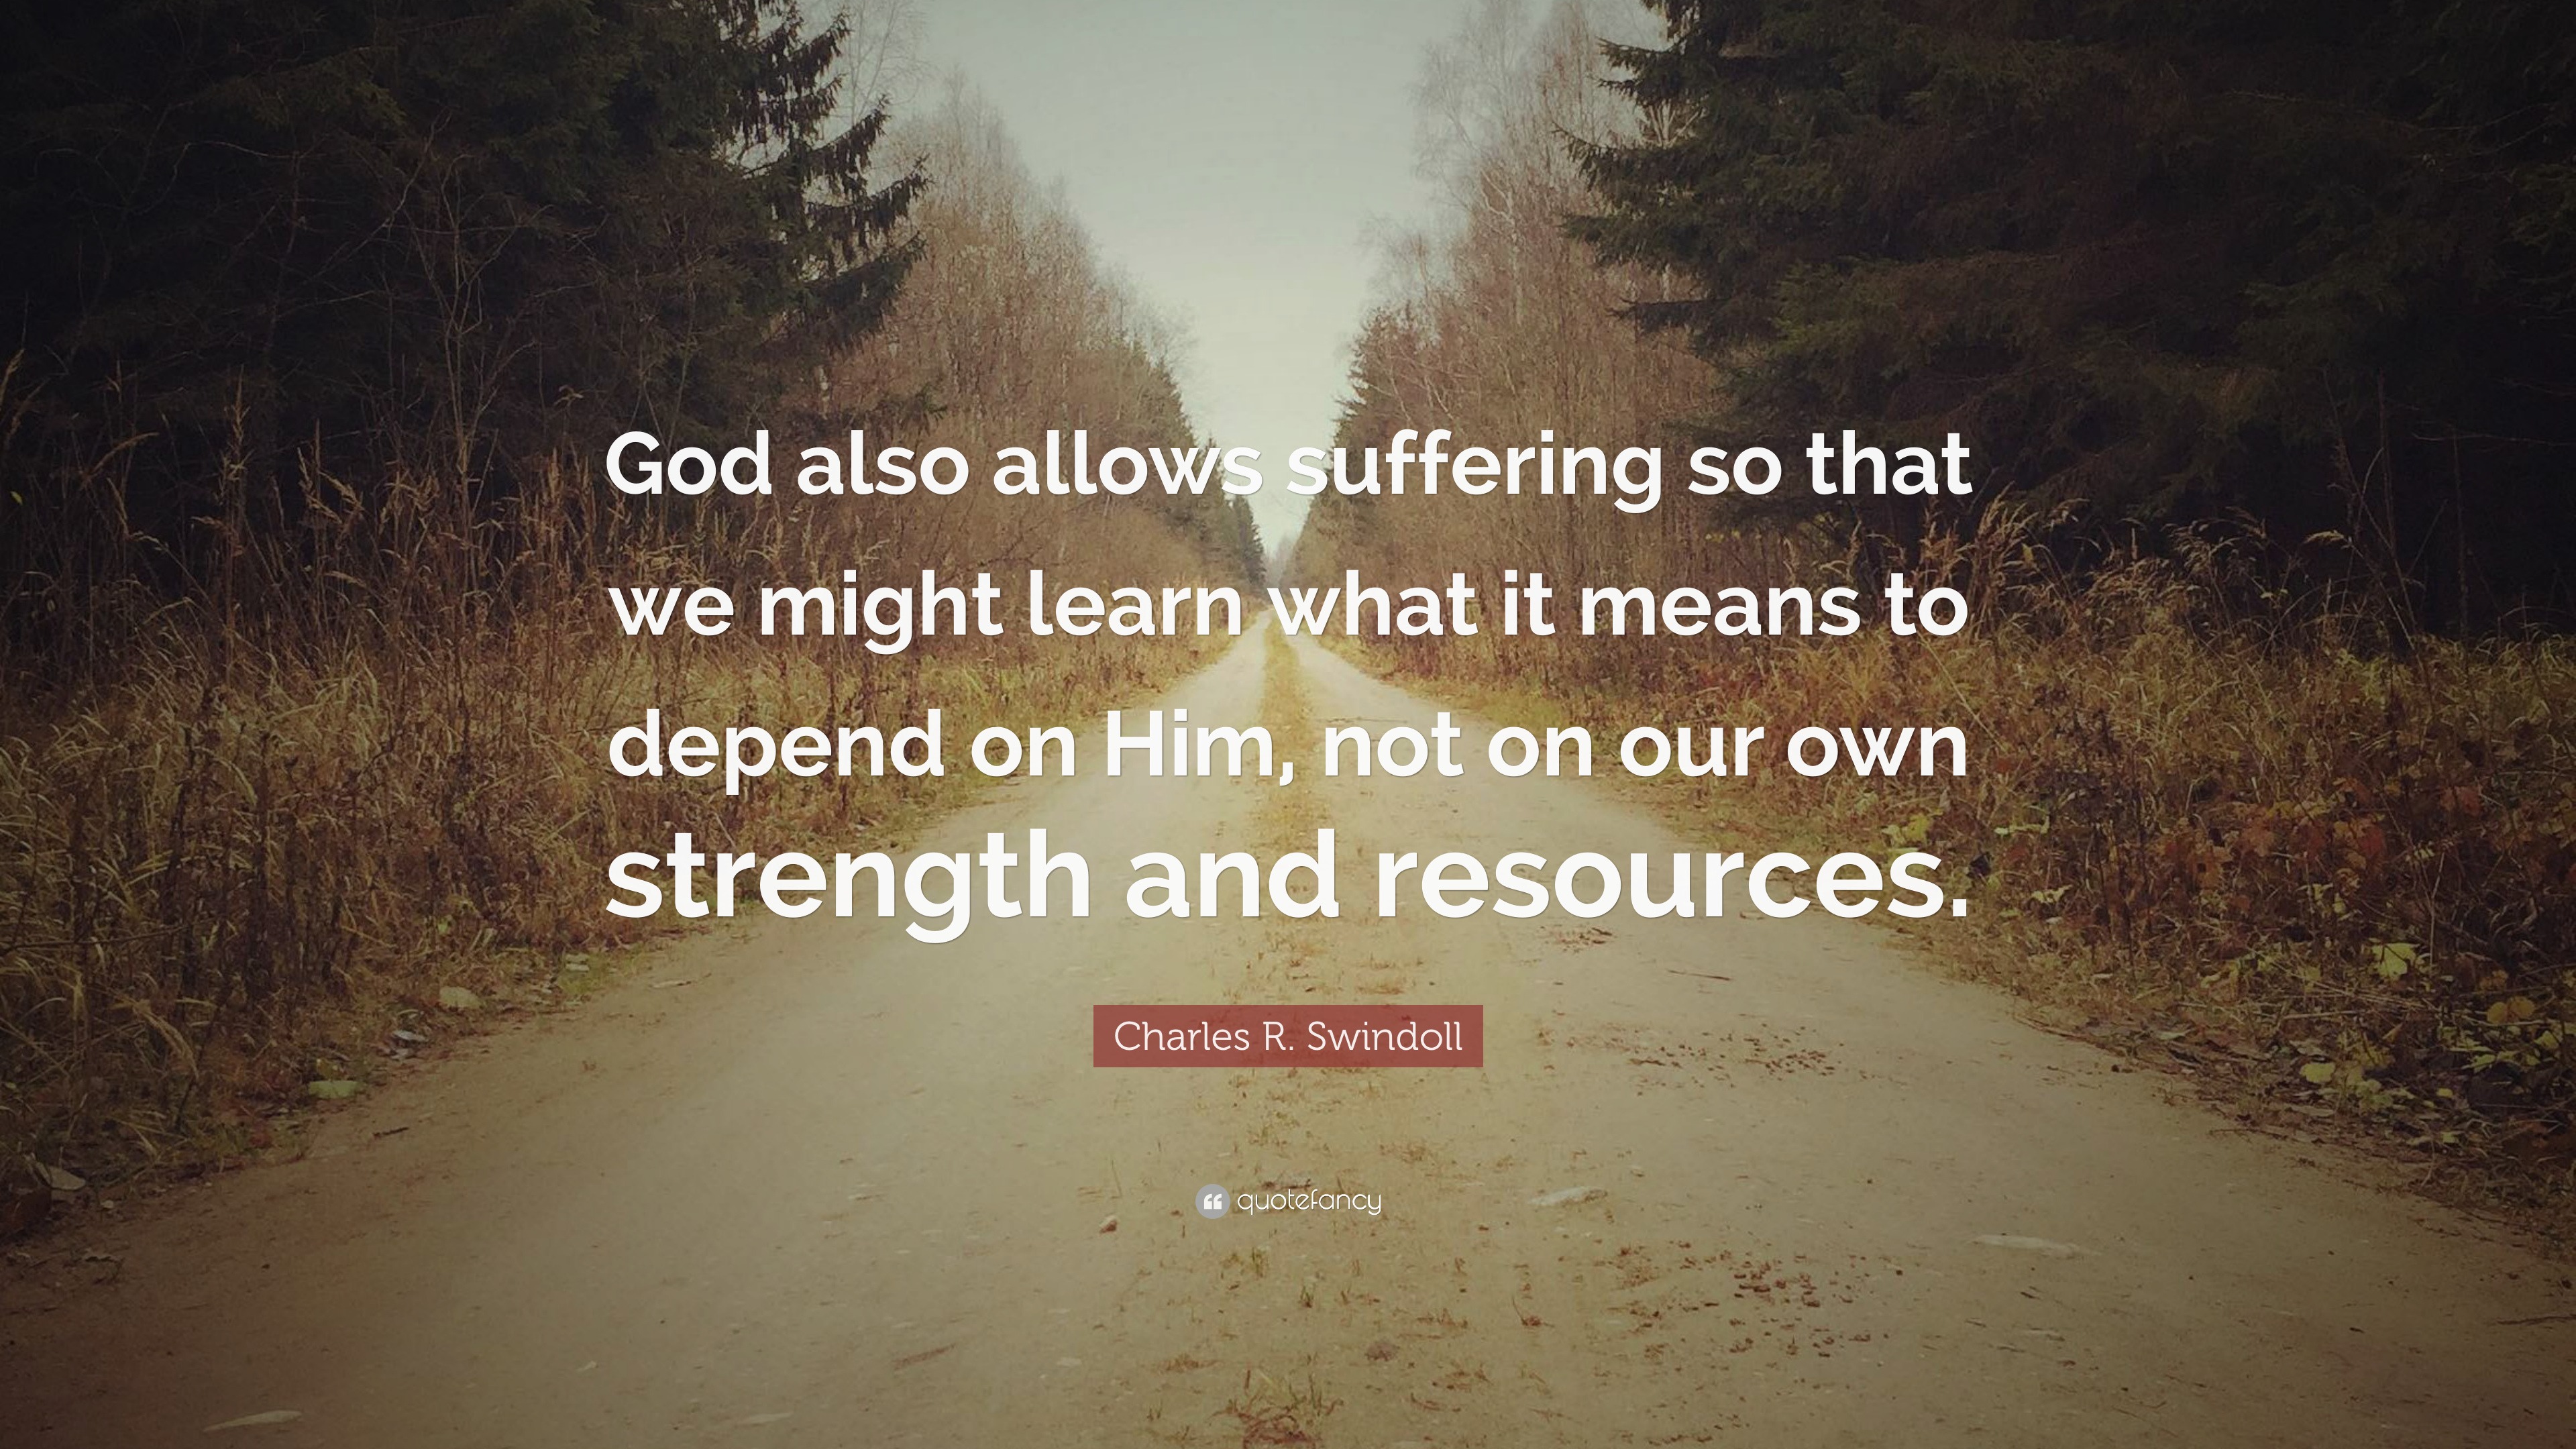 Charles R. Swindoll Quote: “God also allows suffering so that we might ...